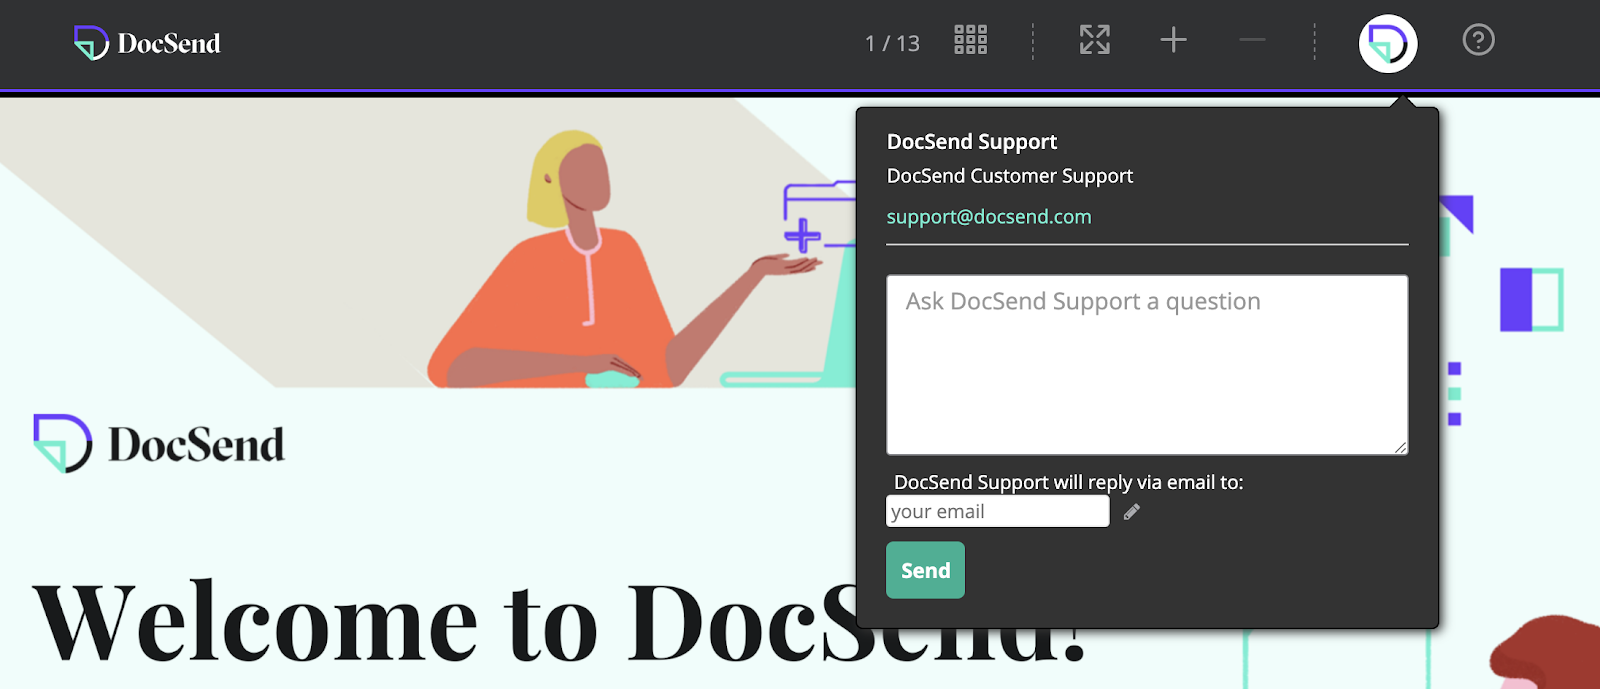 how to download pdf from docsend